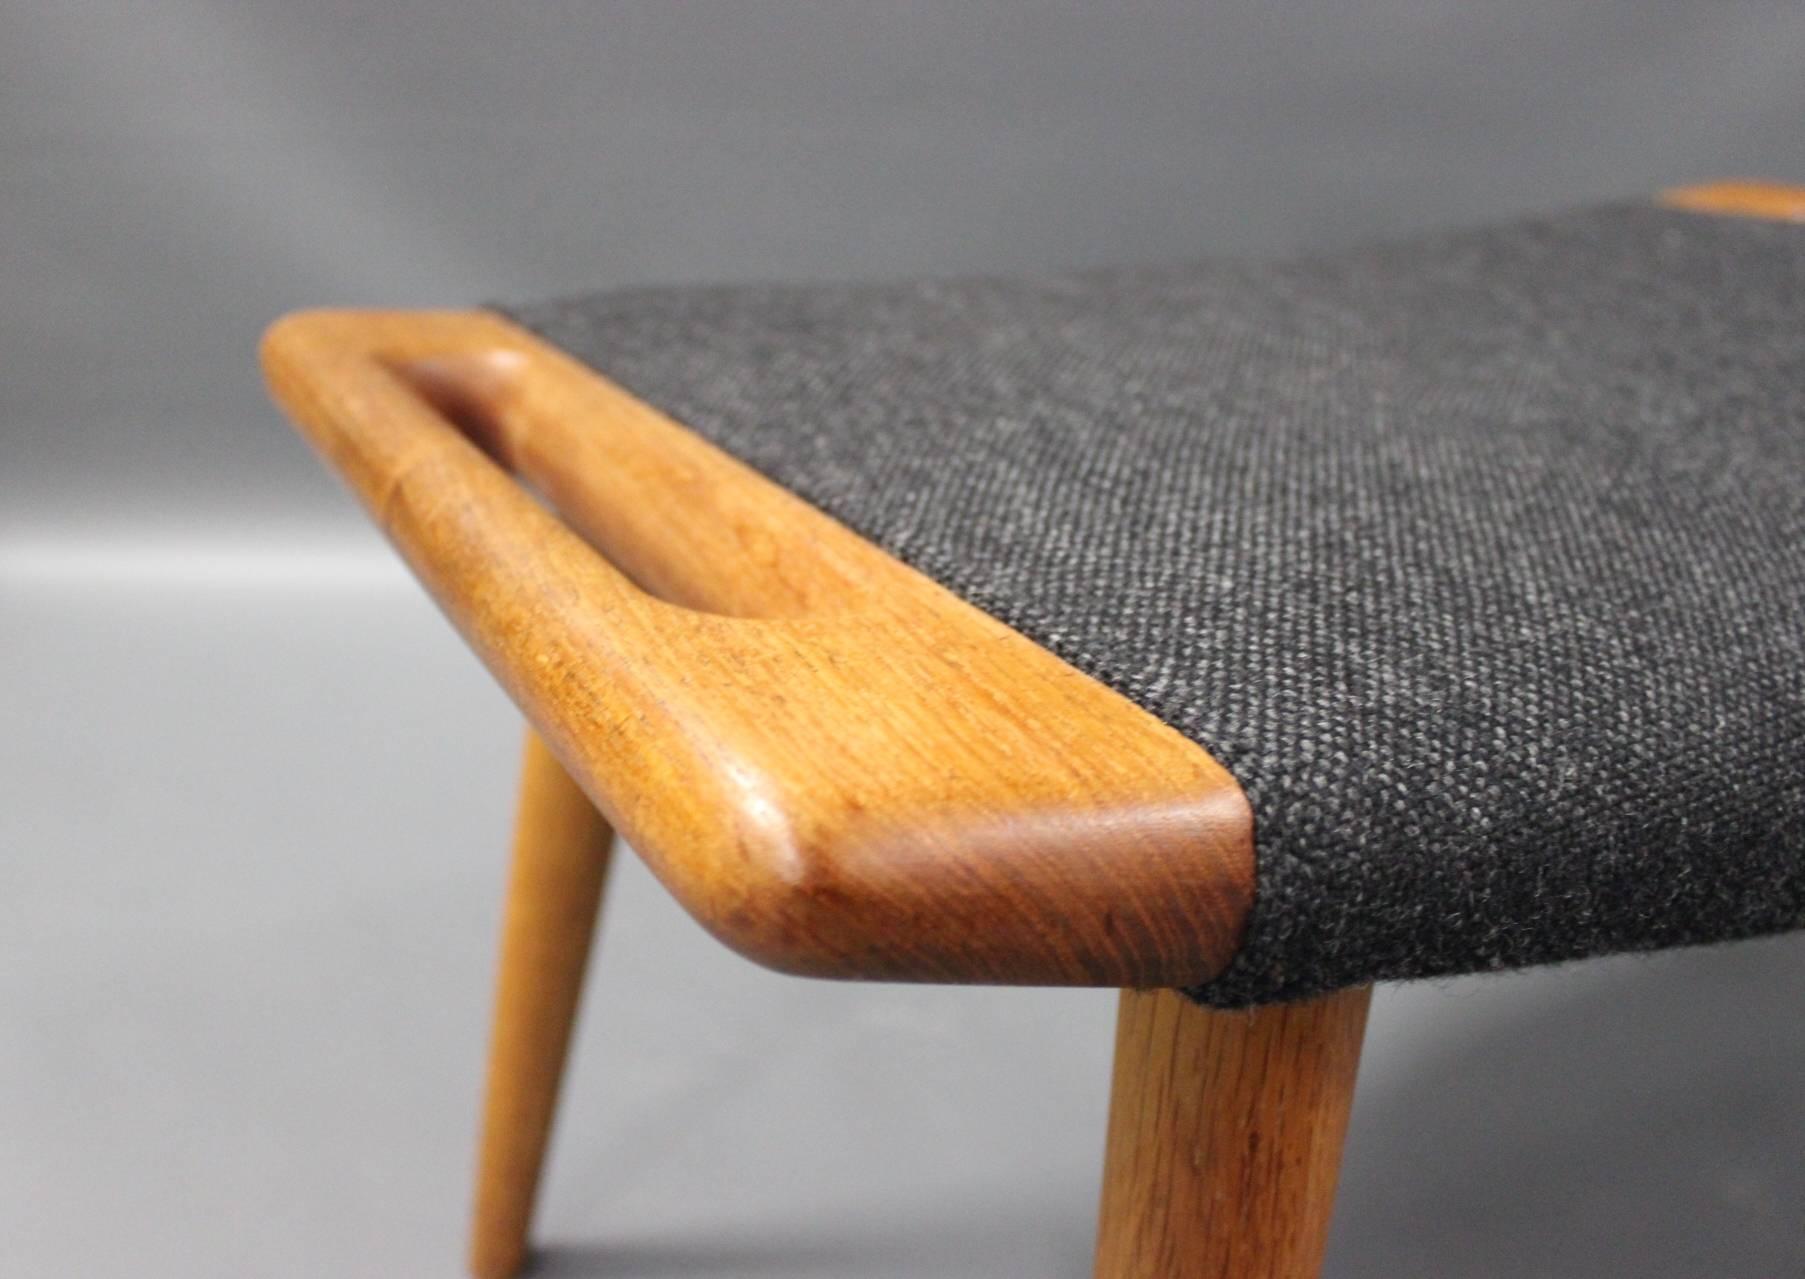 Stool for the papa bear chair, model PP120, designed by Hans J. Wegner in 1954 and manufactured by P.P. furniture. The stool is upholstered in dark grey Hallingdal wool and with legs of teak.